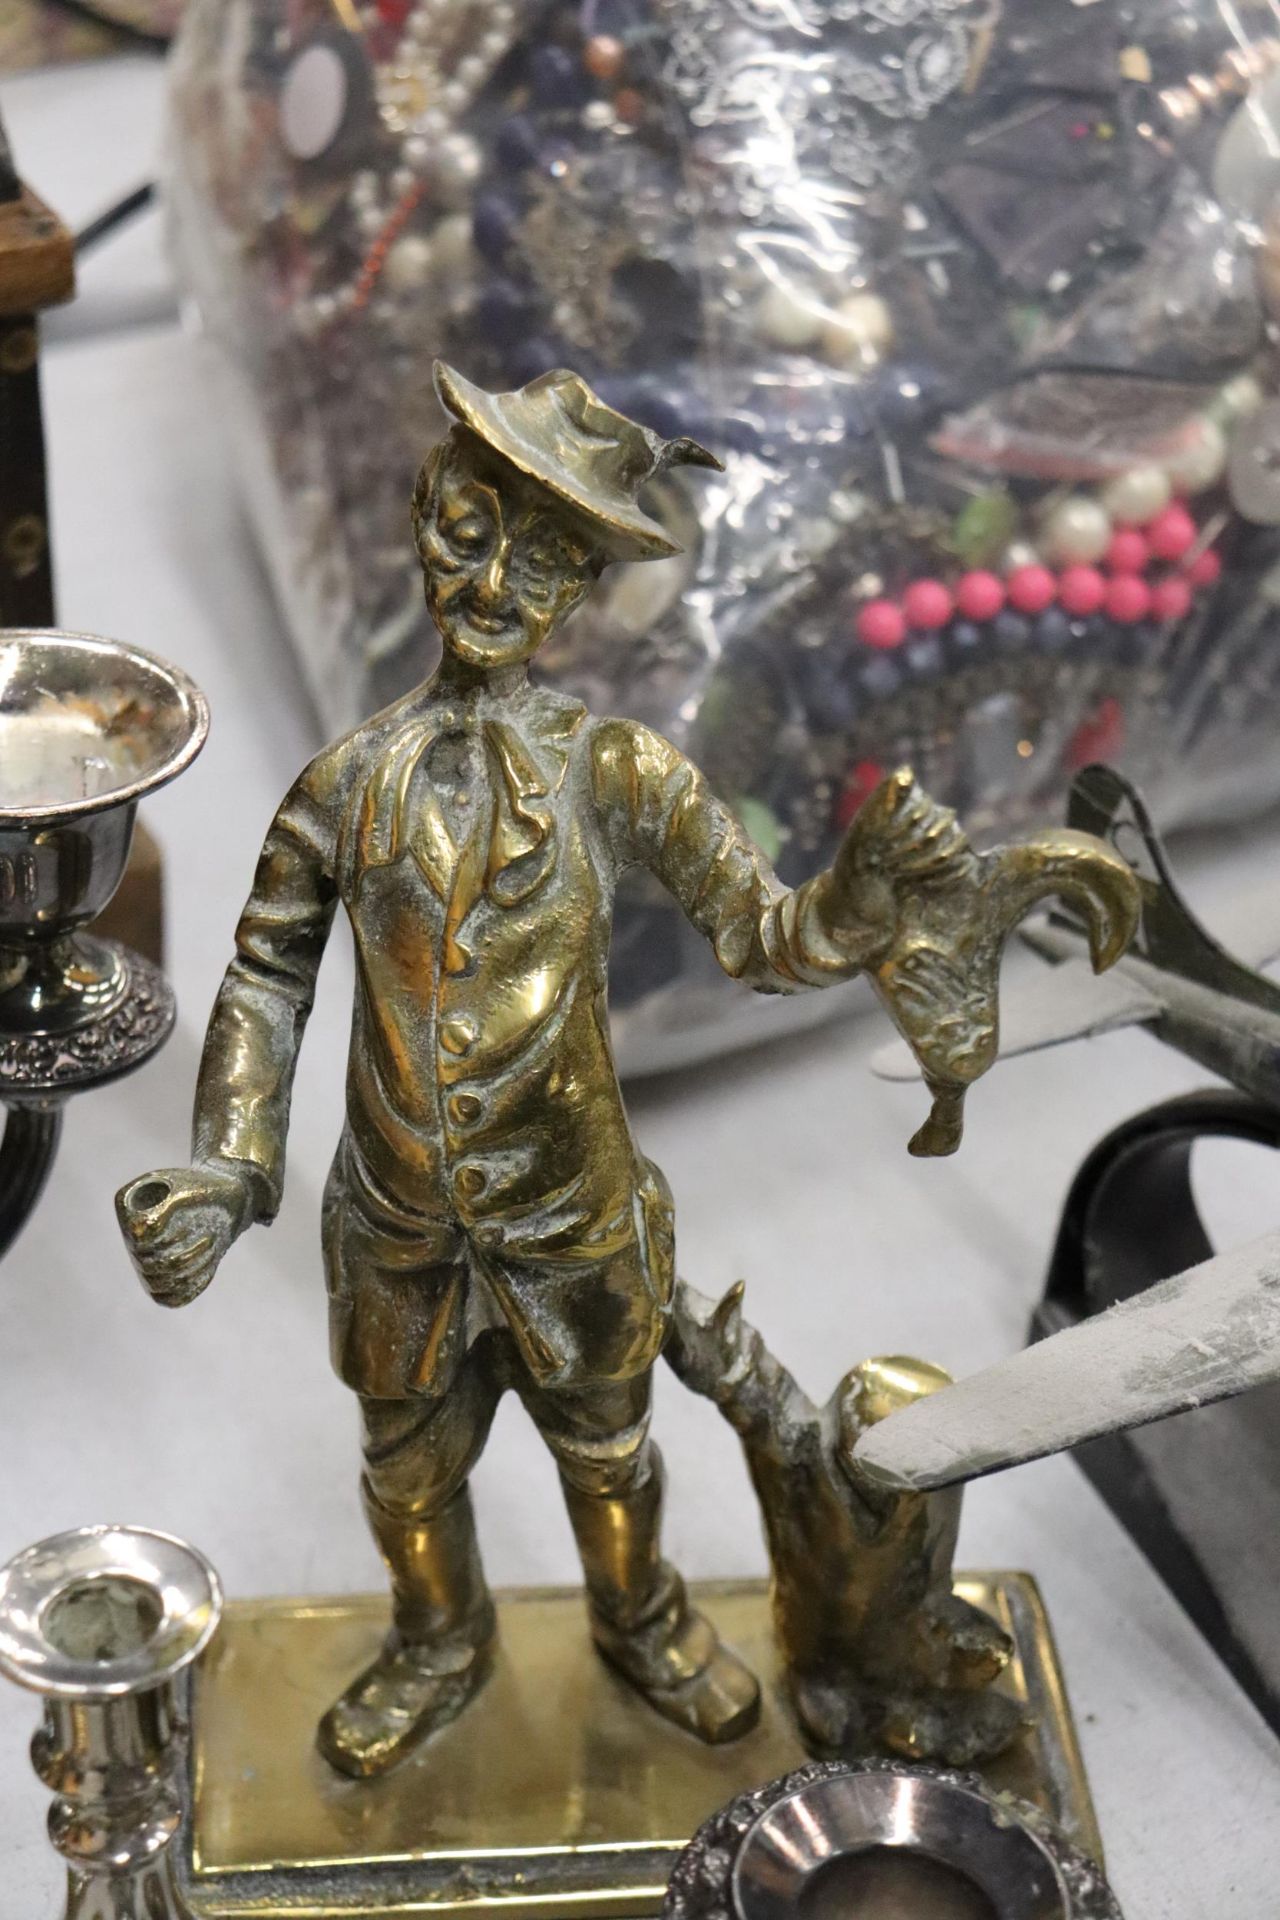 A QUANTITY OF BRASS AND SILVER PLATE TO INCLUDE A HEAVY POACHER FIGURE, CANDLESTICKS, ANIMAL - Image 13 of 15